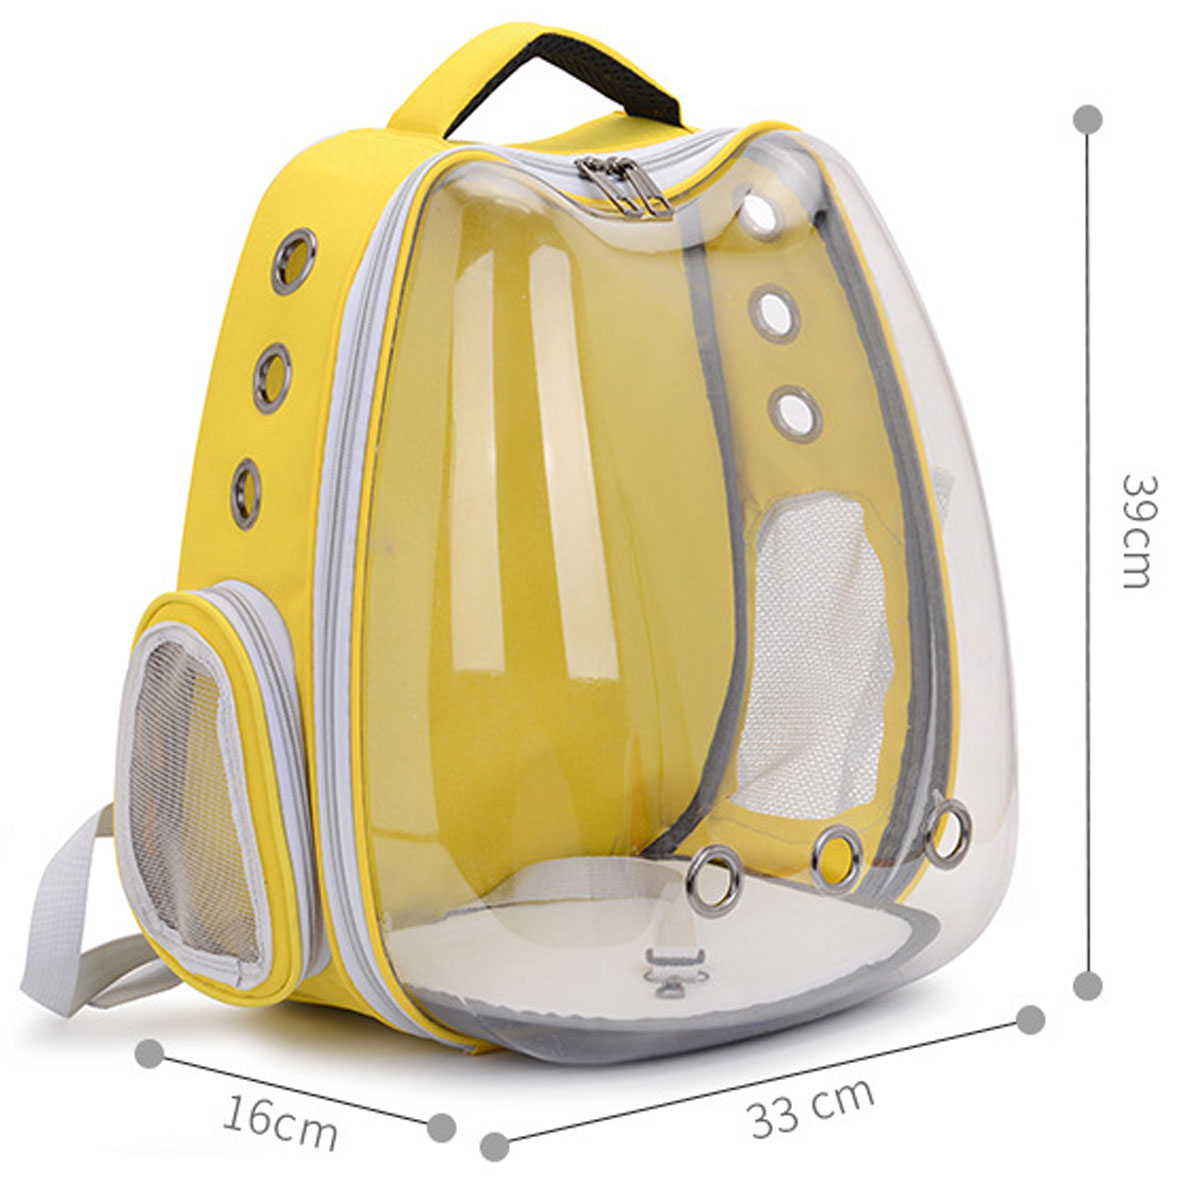 Multi-function-Pet-Carrier-Backpack-Waterproof-Oxford-Cloth-for-Cat-Dog-Puppy-Supplies-Travel-Portab-1939112-9